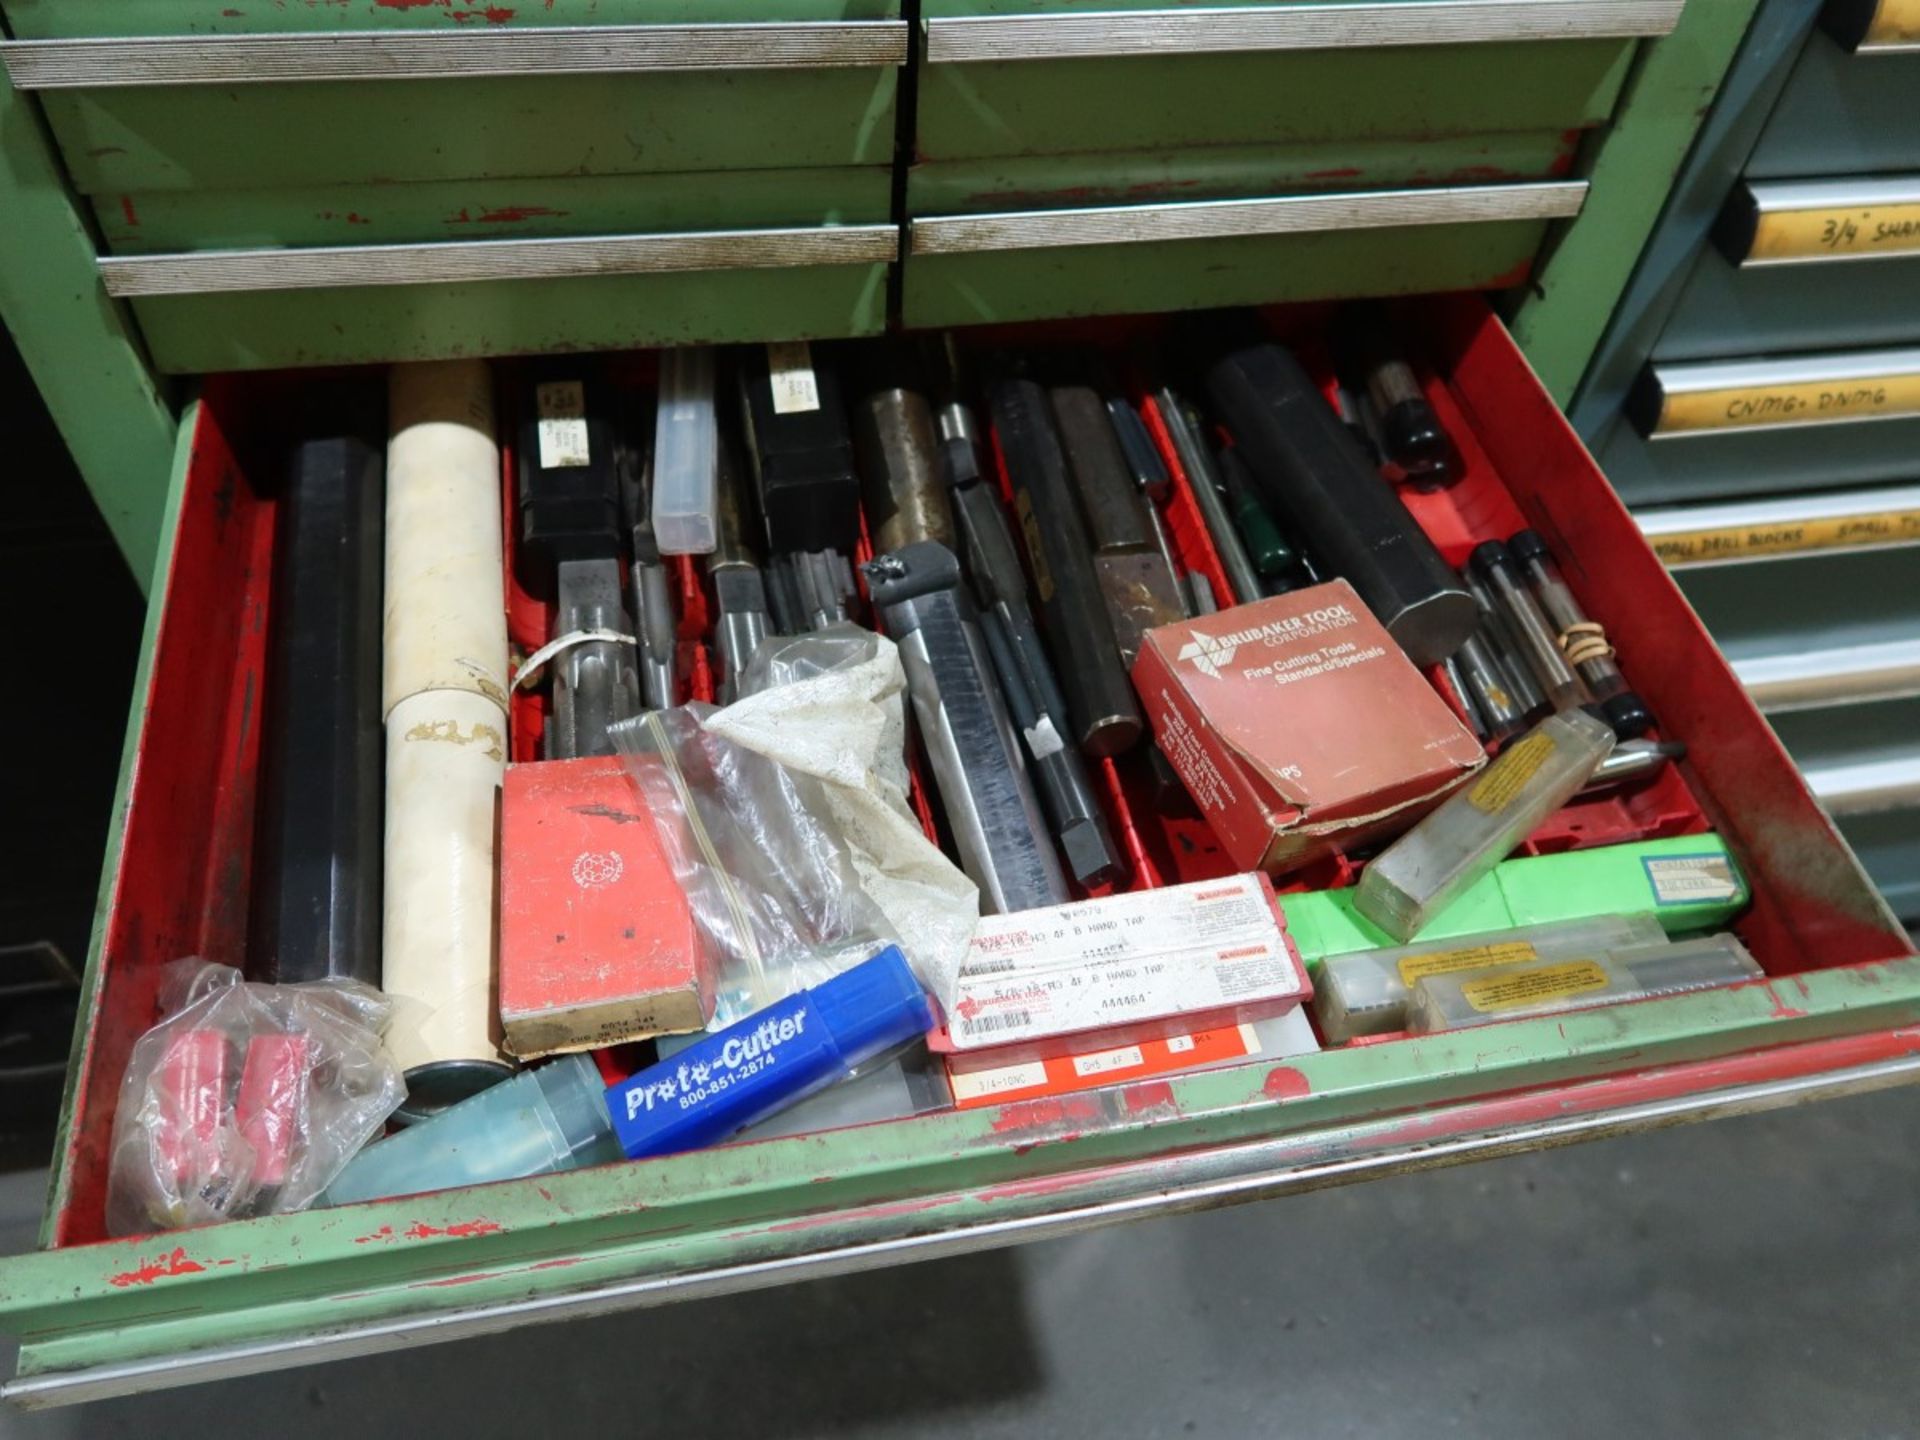 9-DRAWER LISTA LIKE CABINET W/ CONTENTS INCLUDING: DRILLS, REAMERS, TAPS, COLLET PADS, BORING - Image 4 of 8